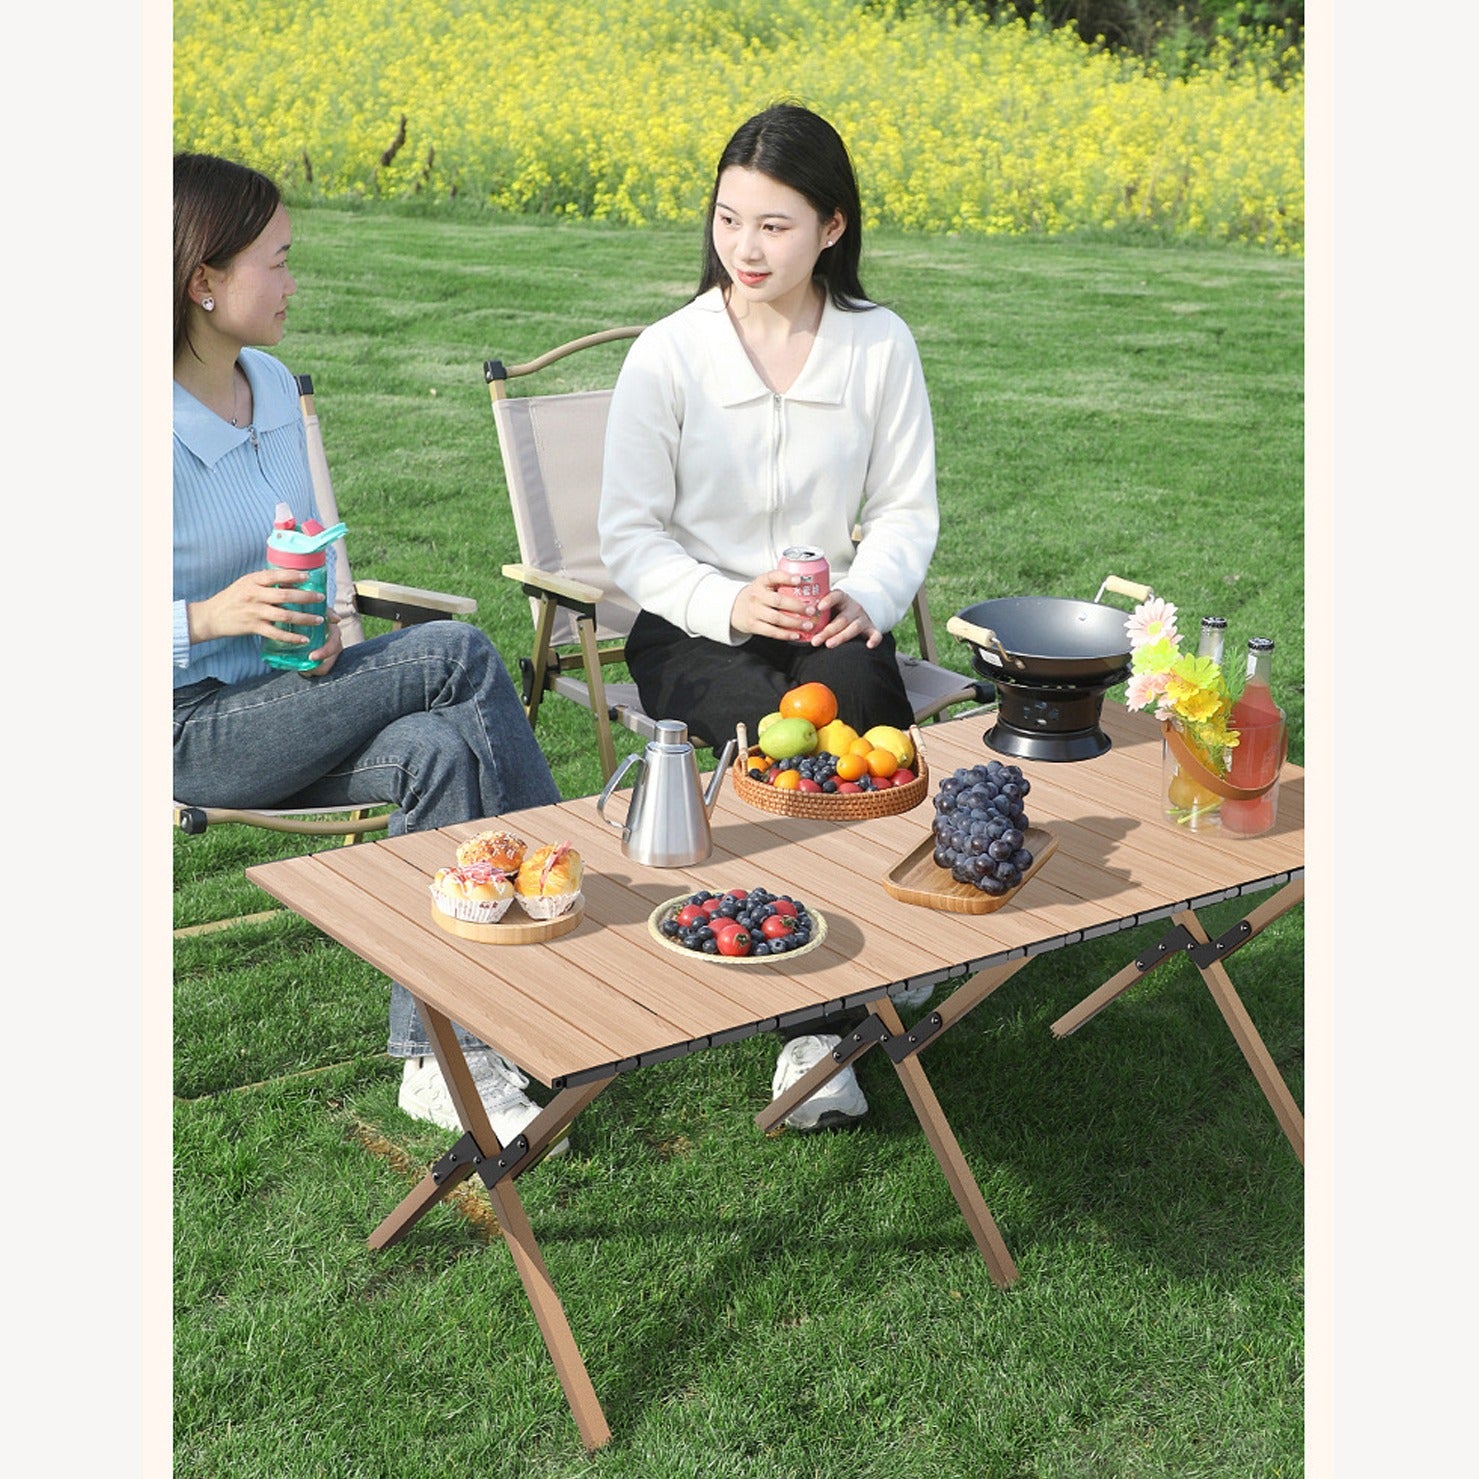 Outdoor Portable Camping Table and chair with fruits,snacks and drinks placed on top of it being used by two ladies in a picnic at a park